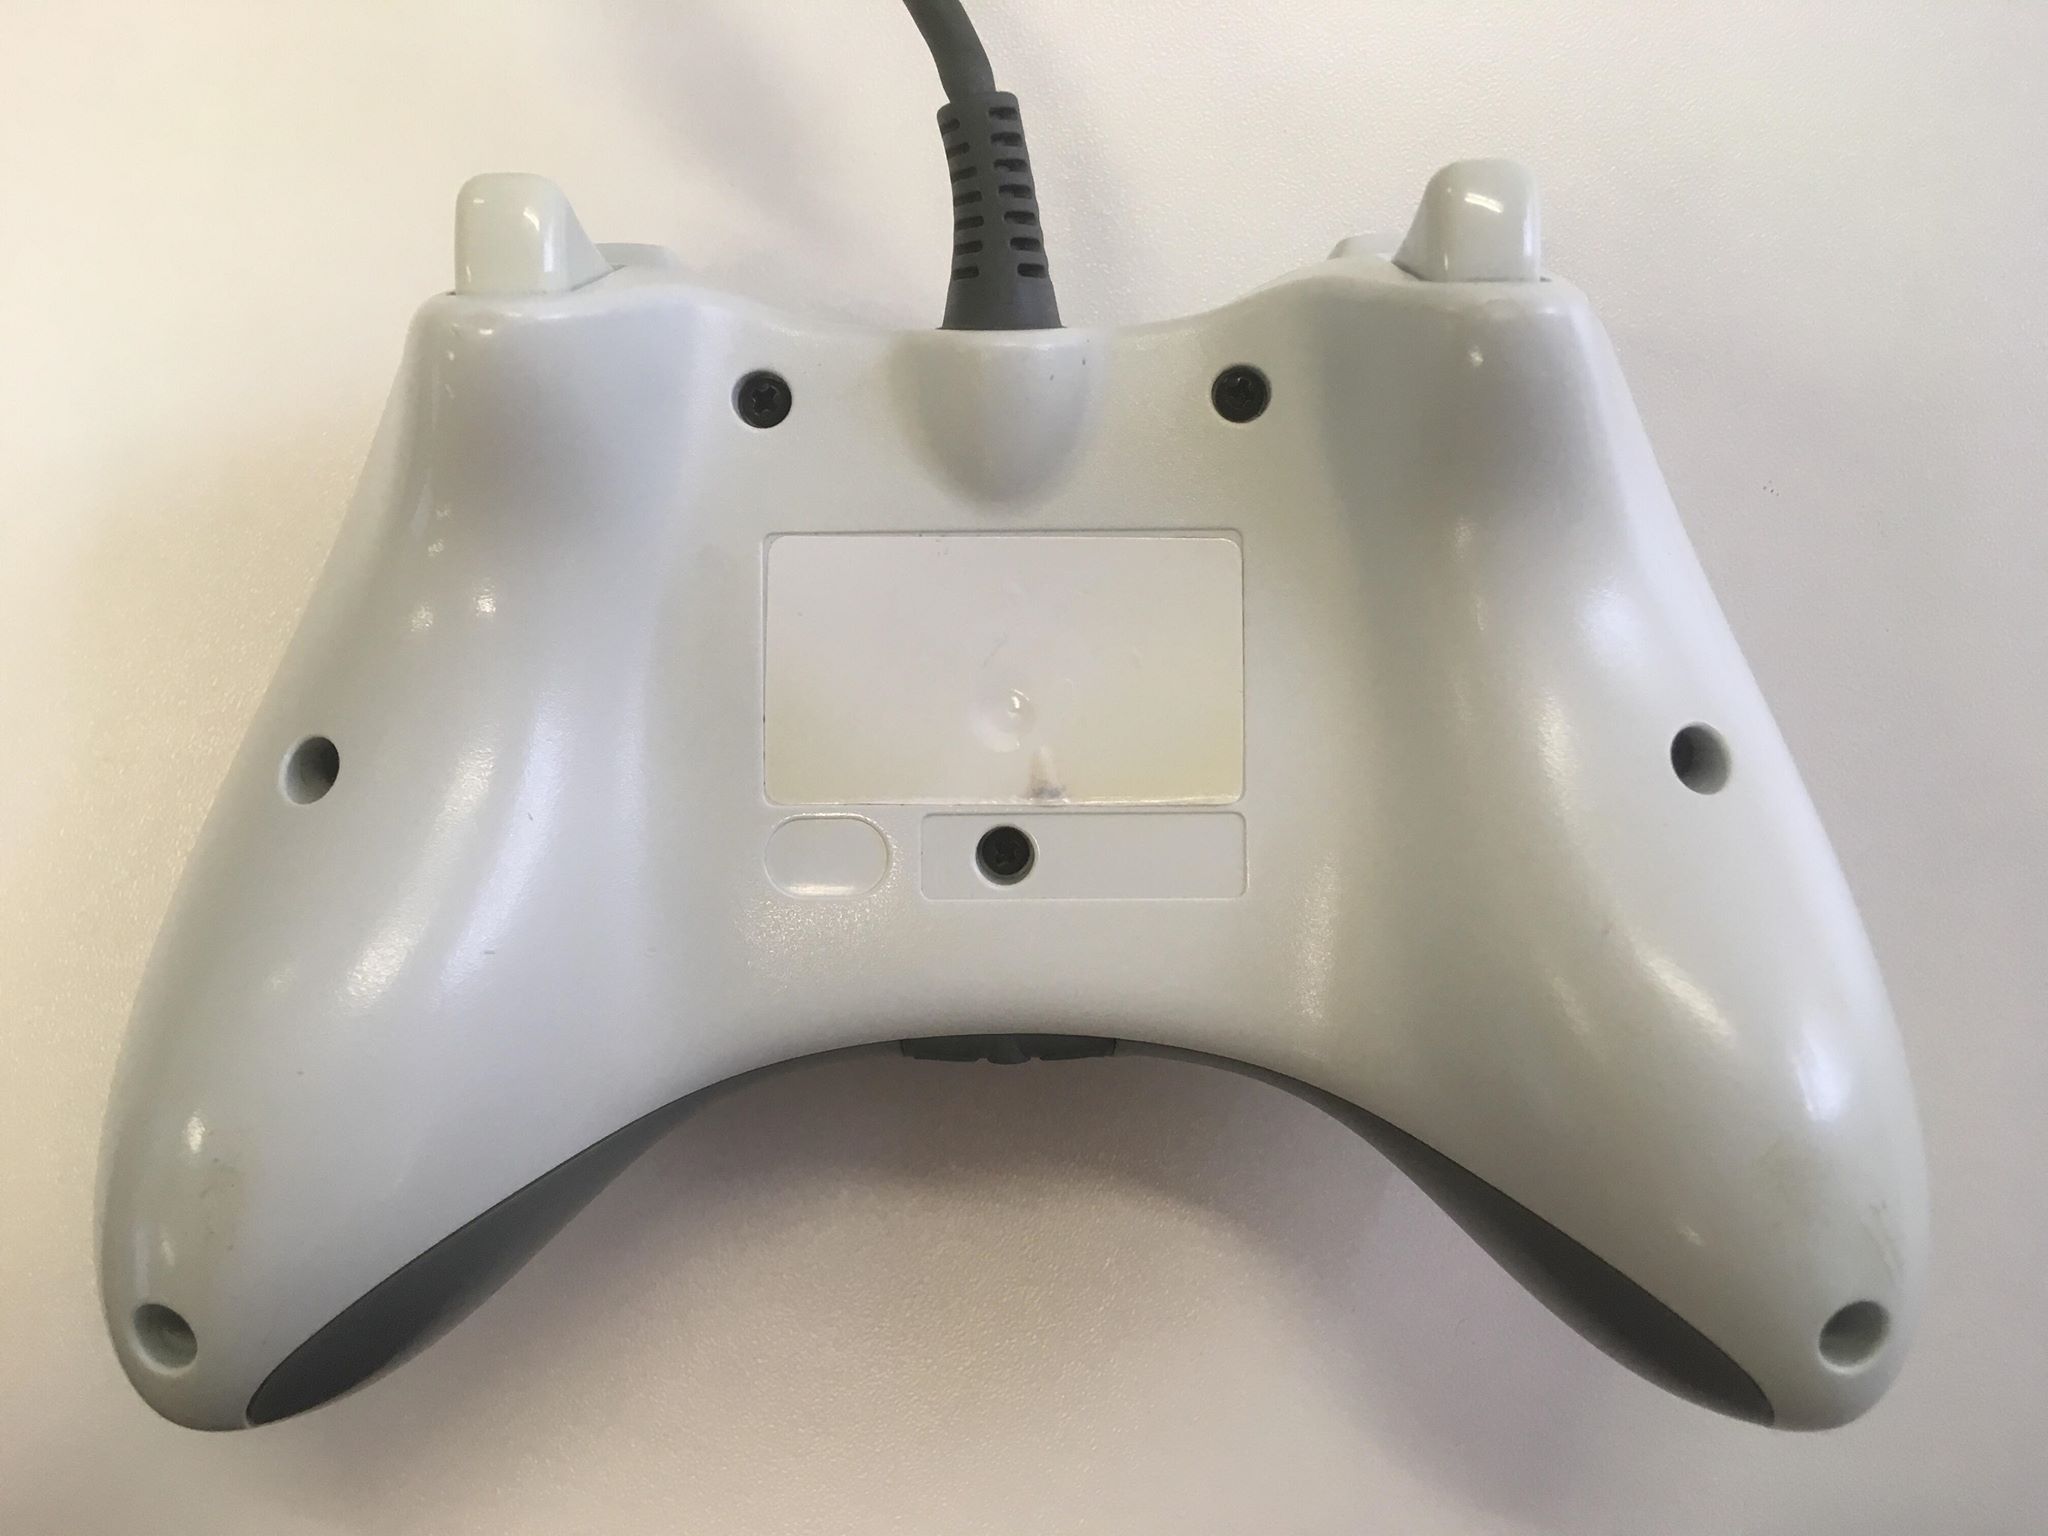 Xbox360 controller wired